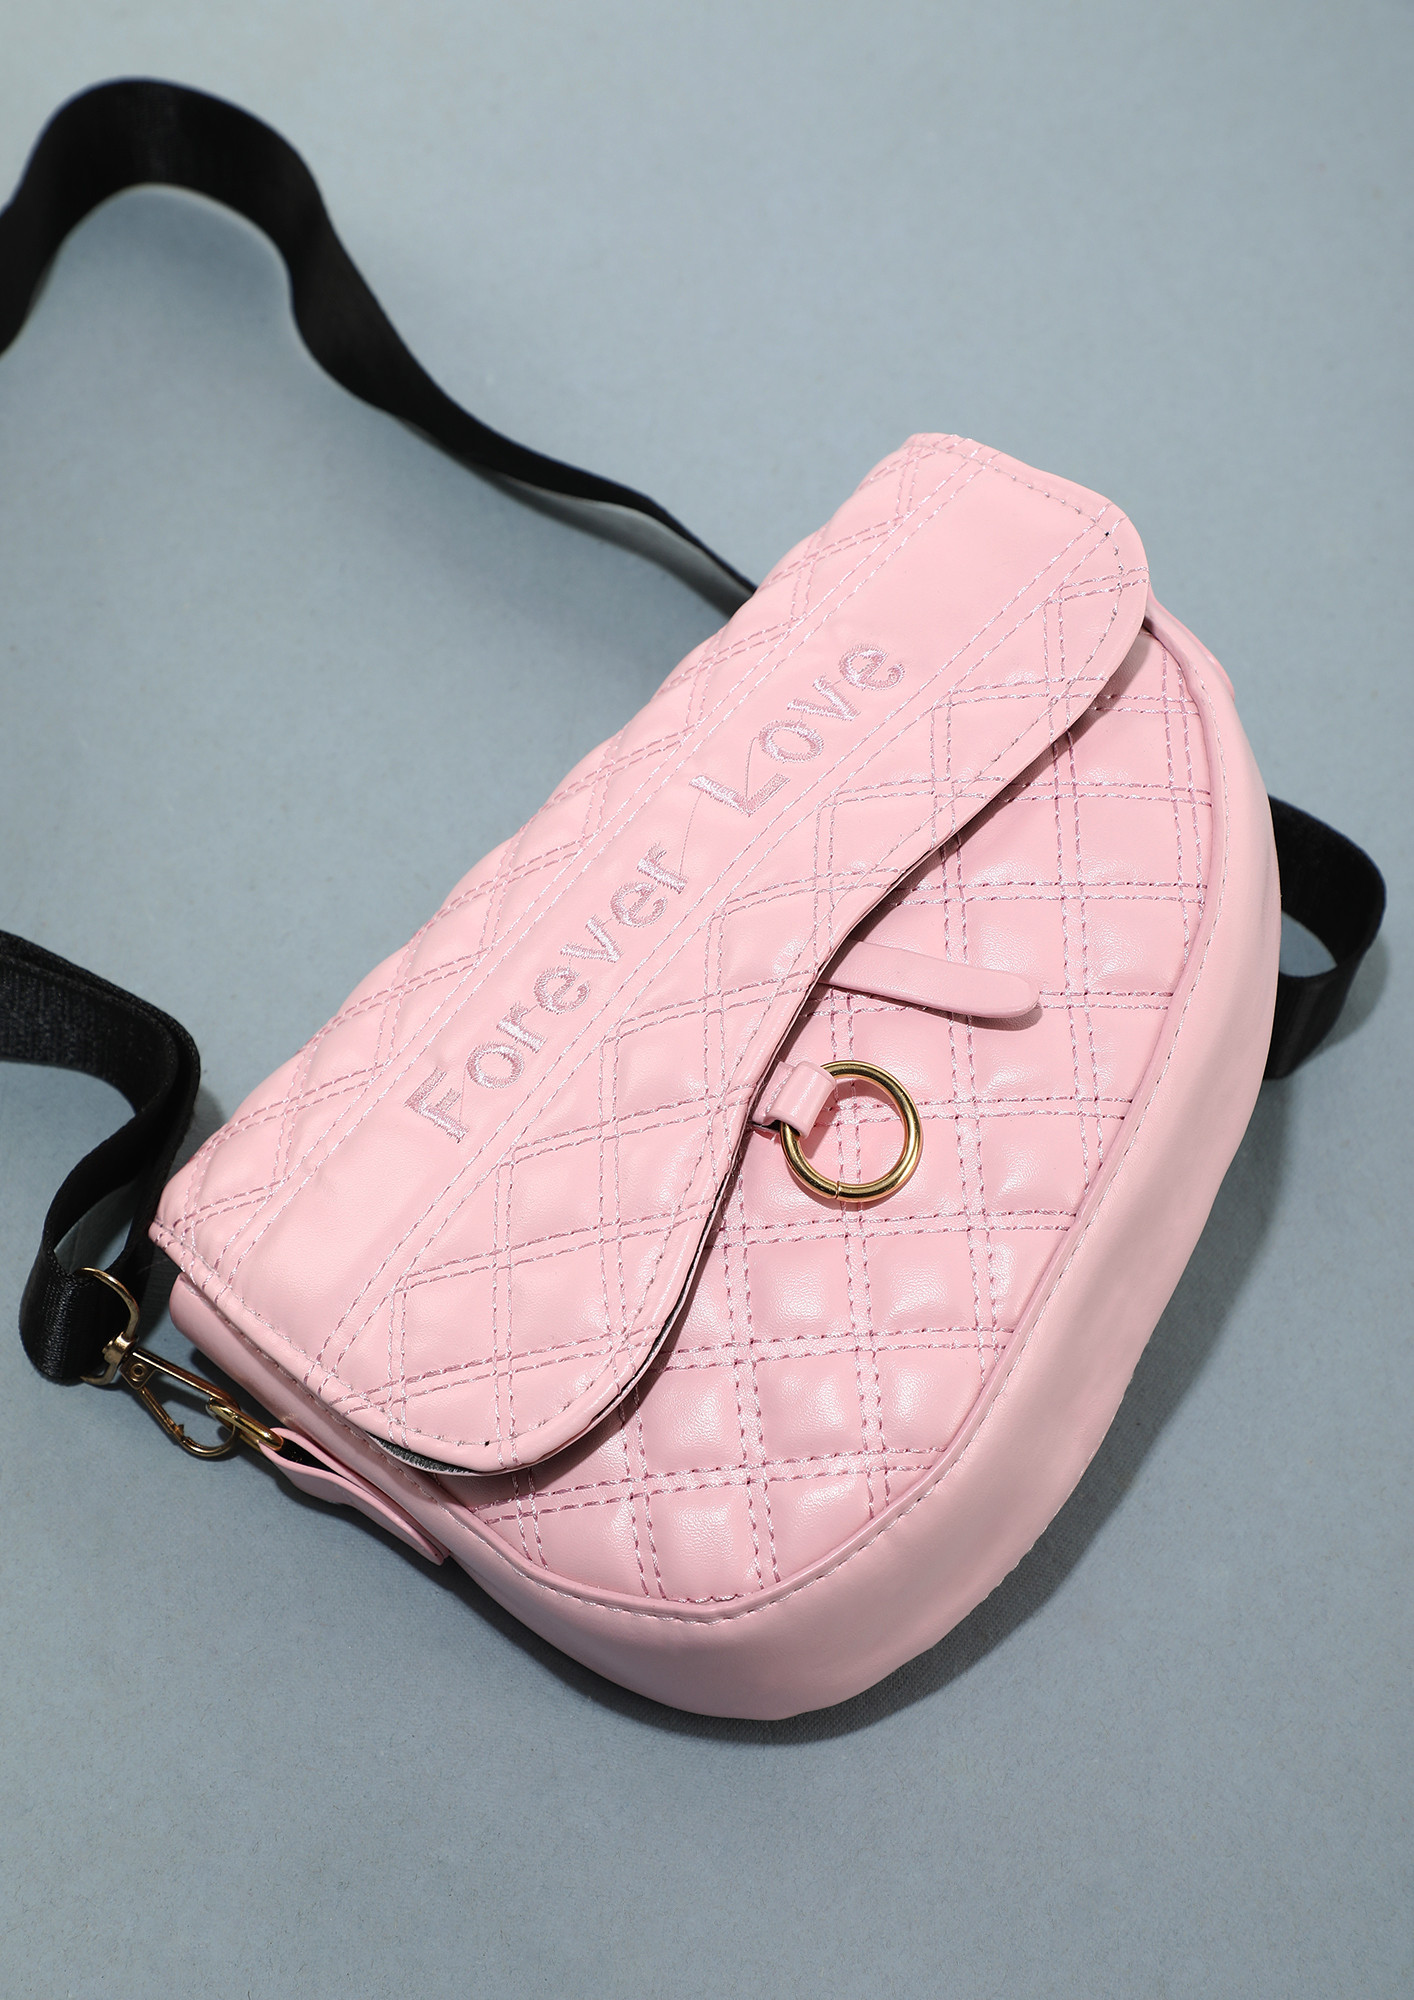 CLASP THE TRENDS BY CHAINS PINK SLING BAG